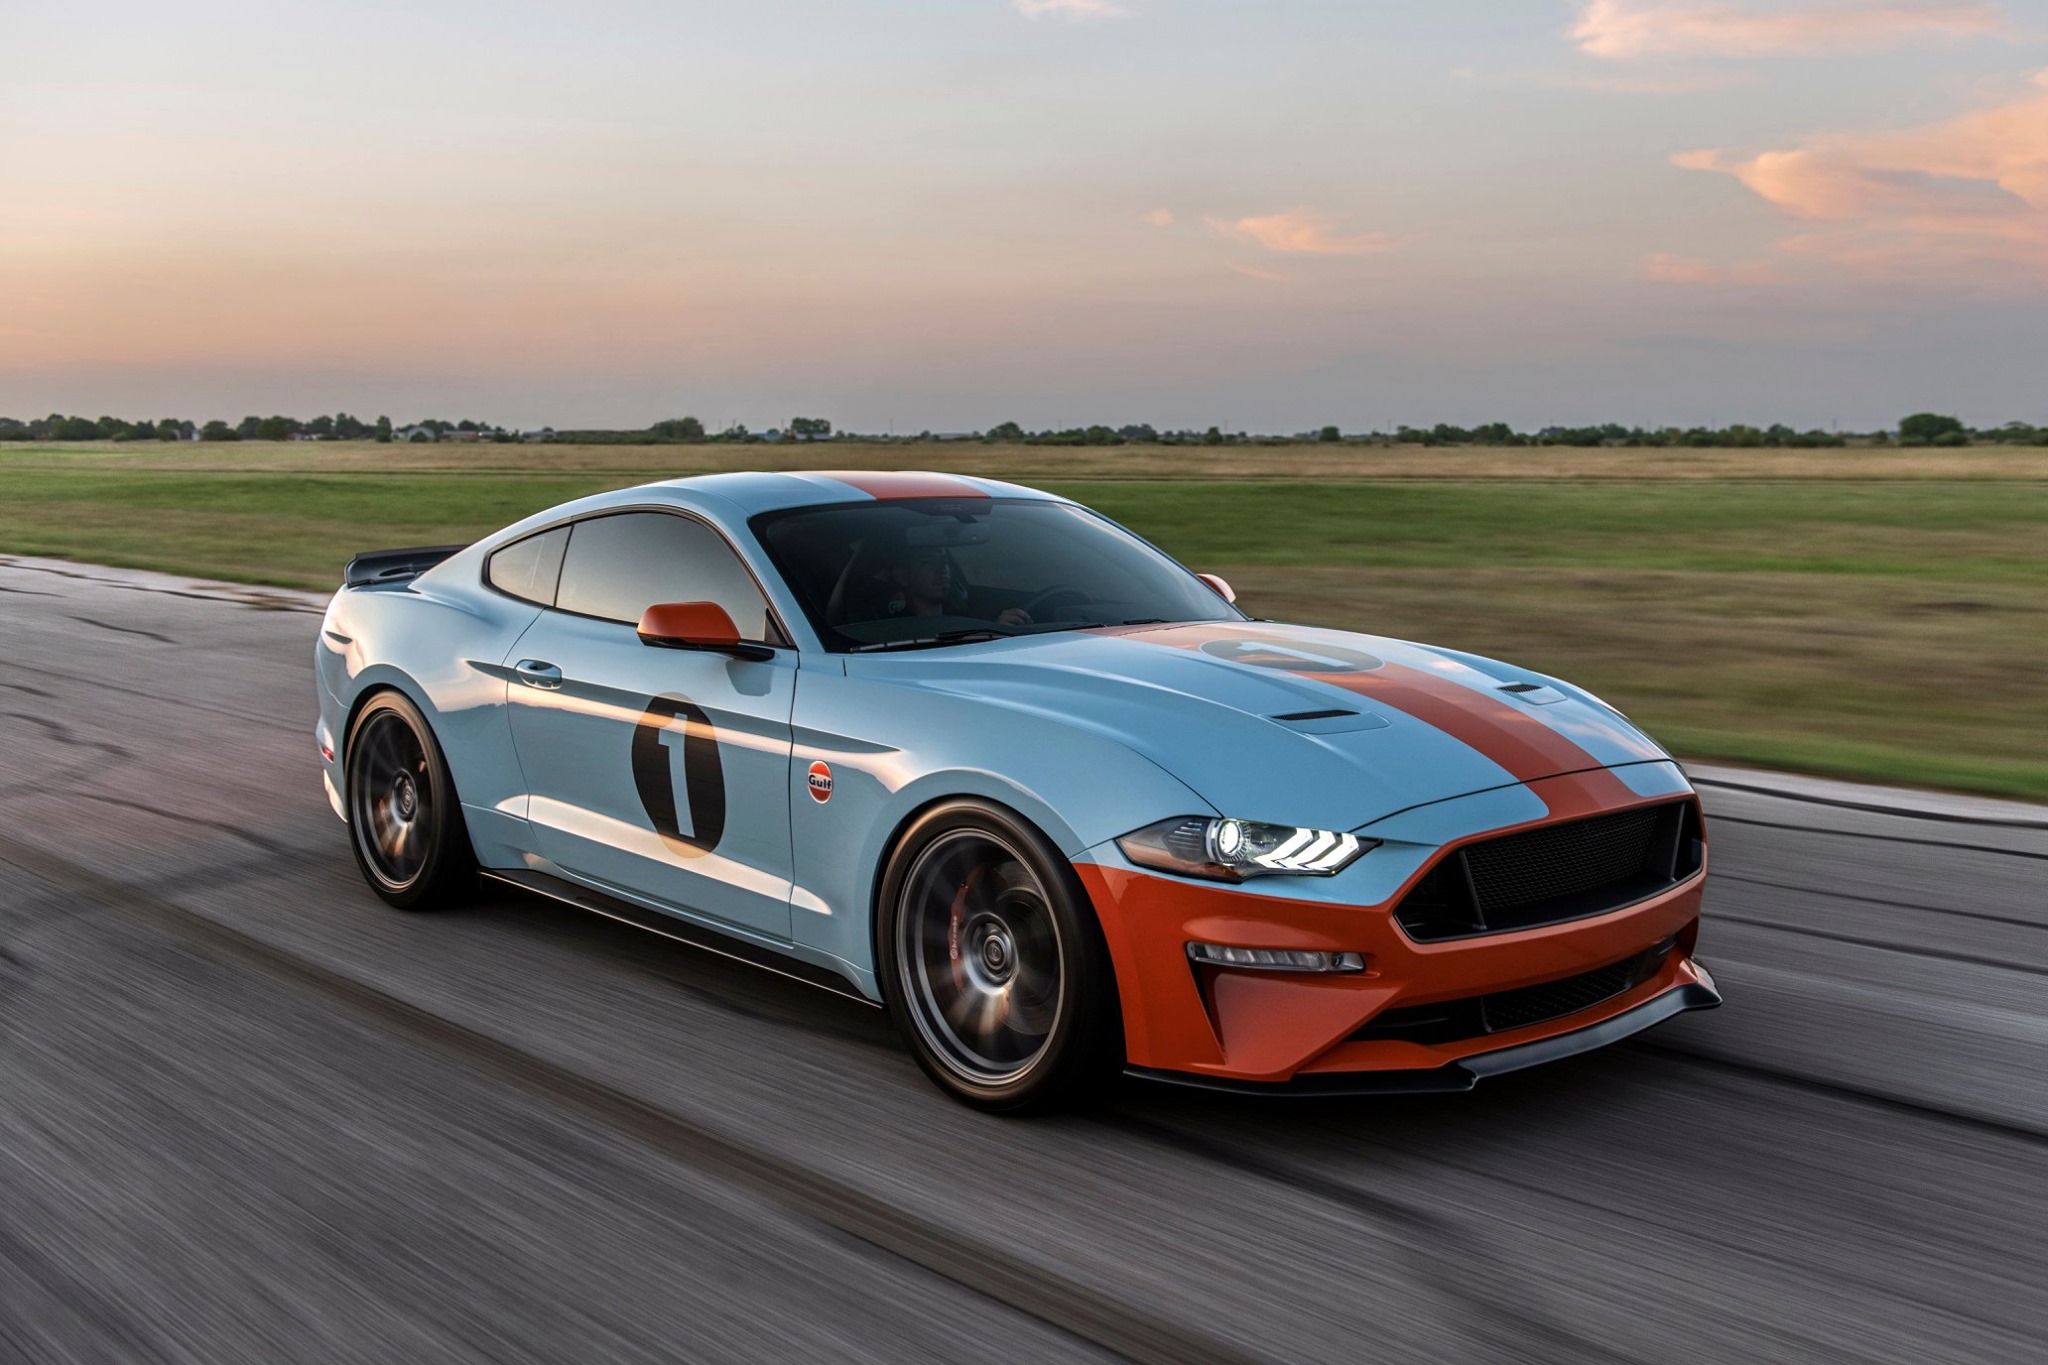 d4af5476-ford-mustang-gulf-5.jpg